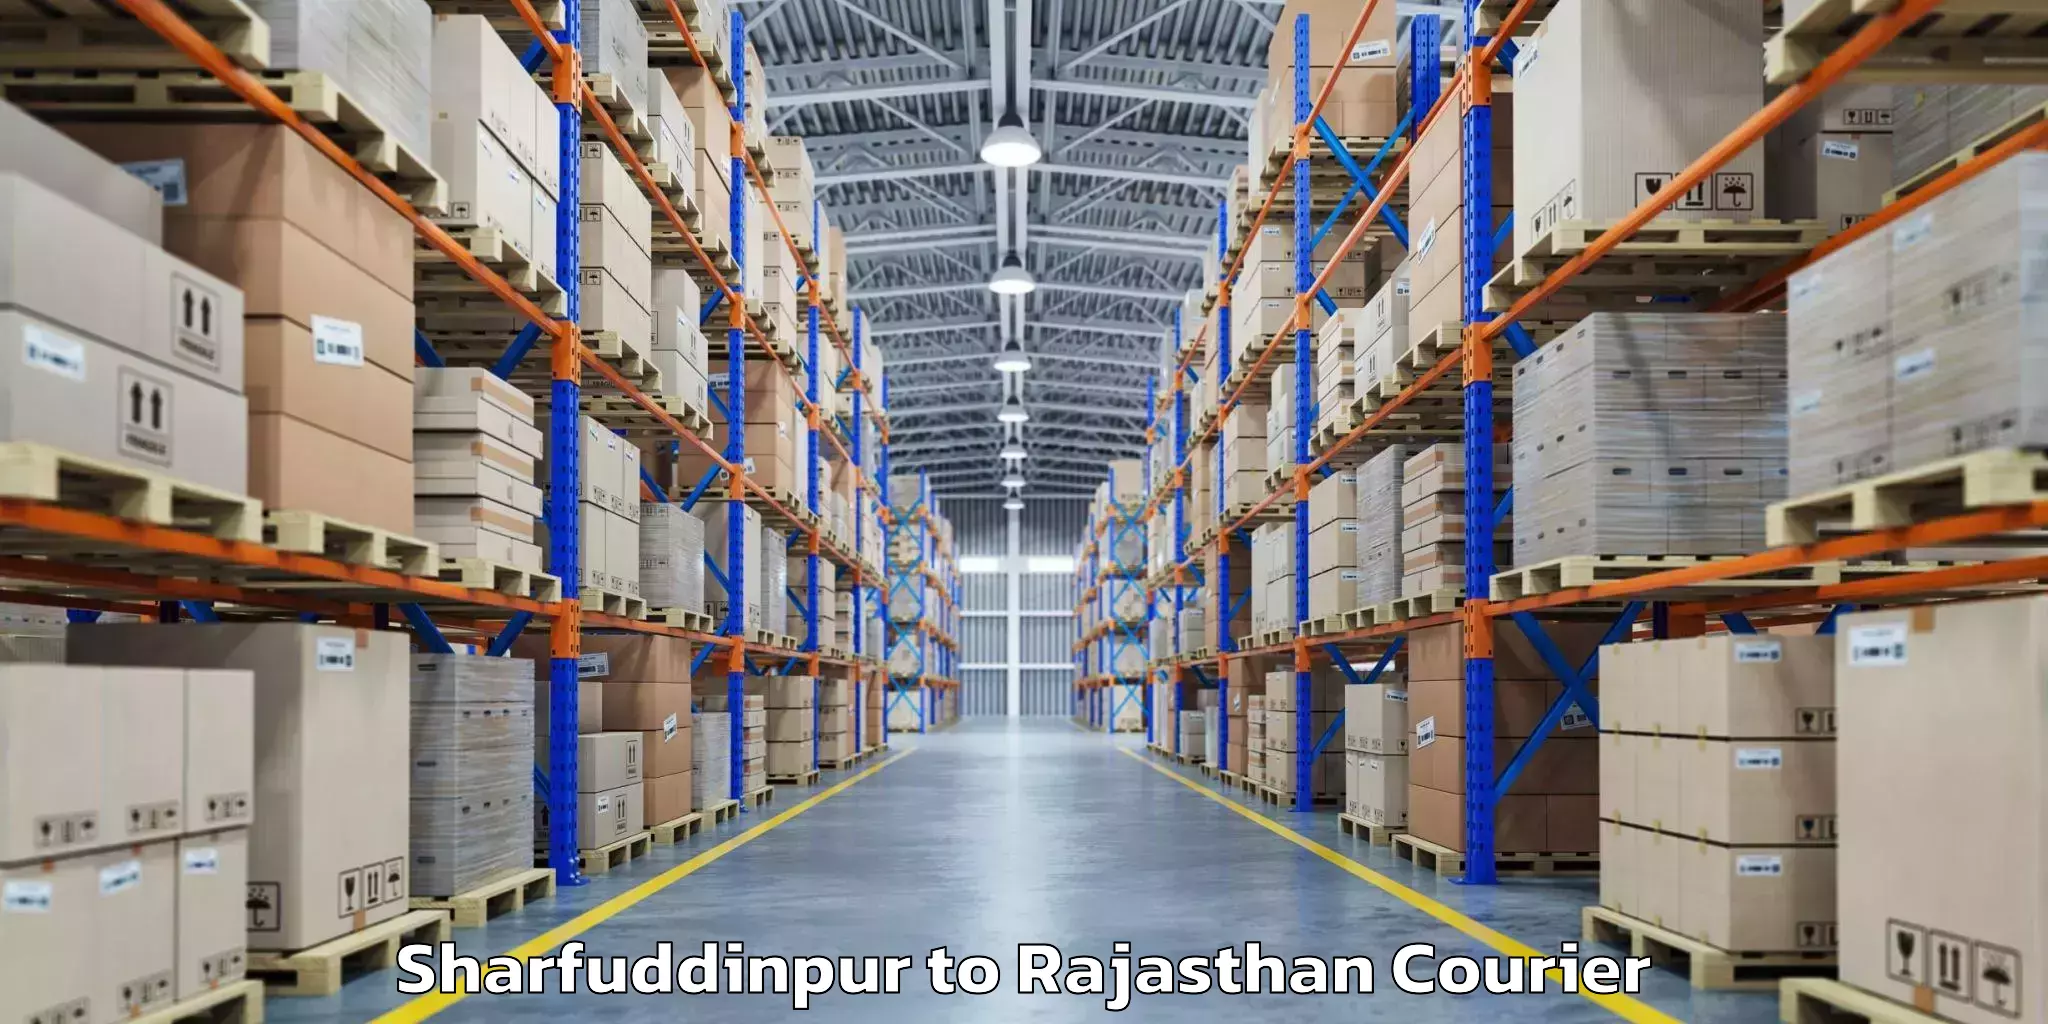 Excess baggage transport Sharfuddinpur to Rajasthan